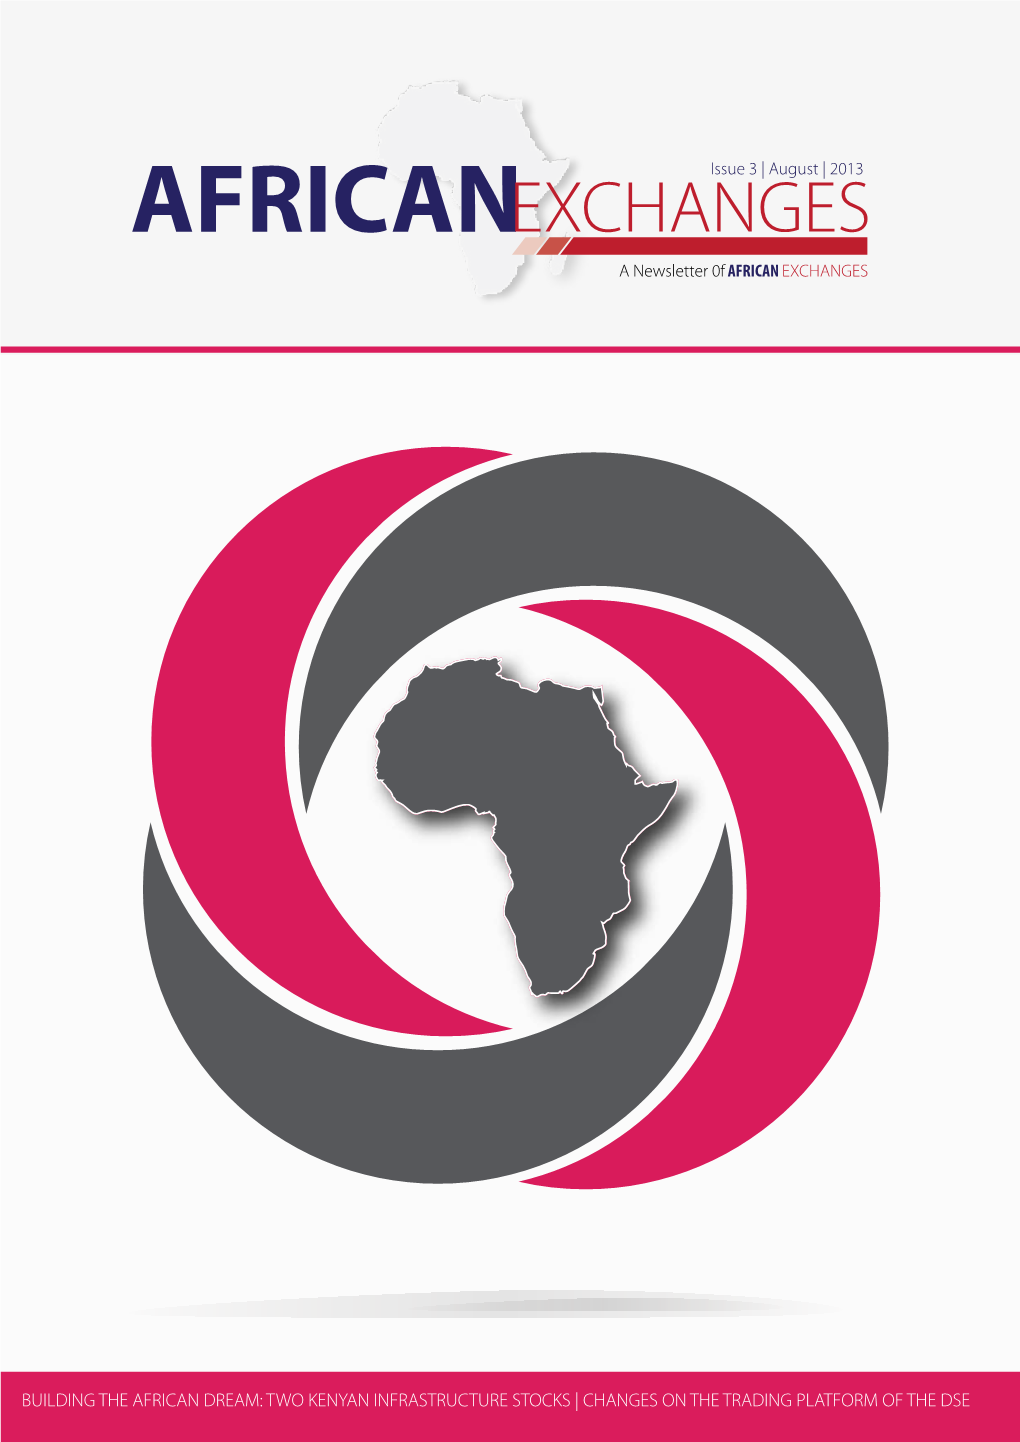 AFRICANEXCHANGES a Newsletter 0F AFRICAN EXCHANGES